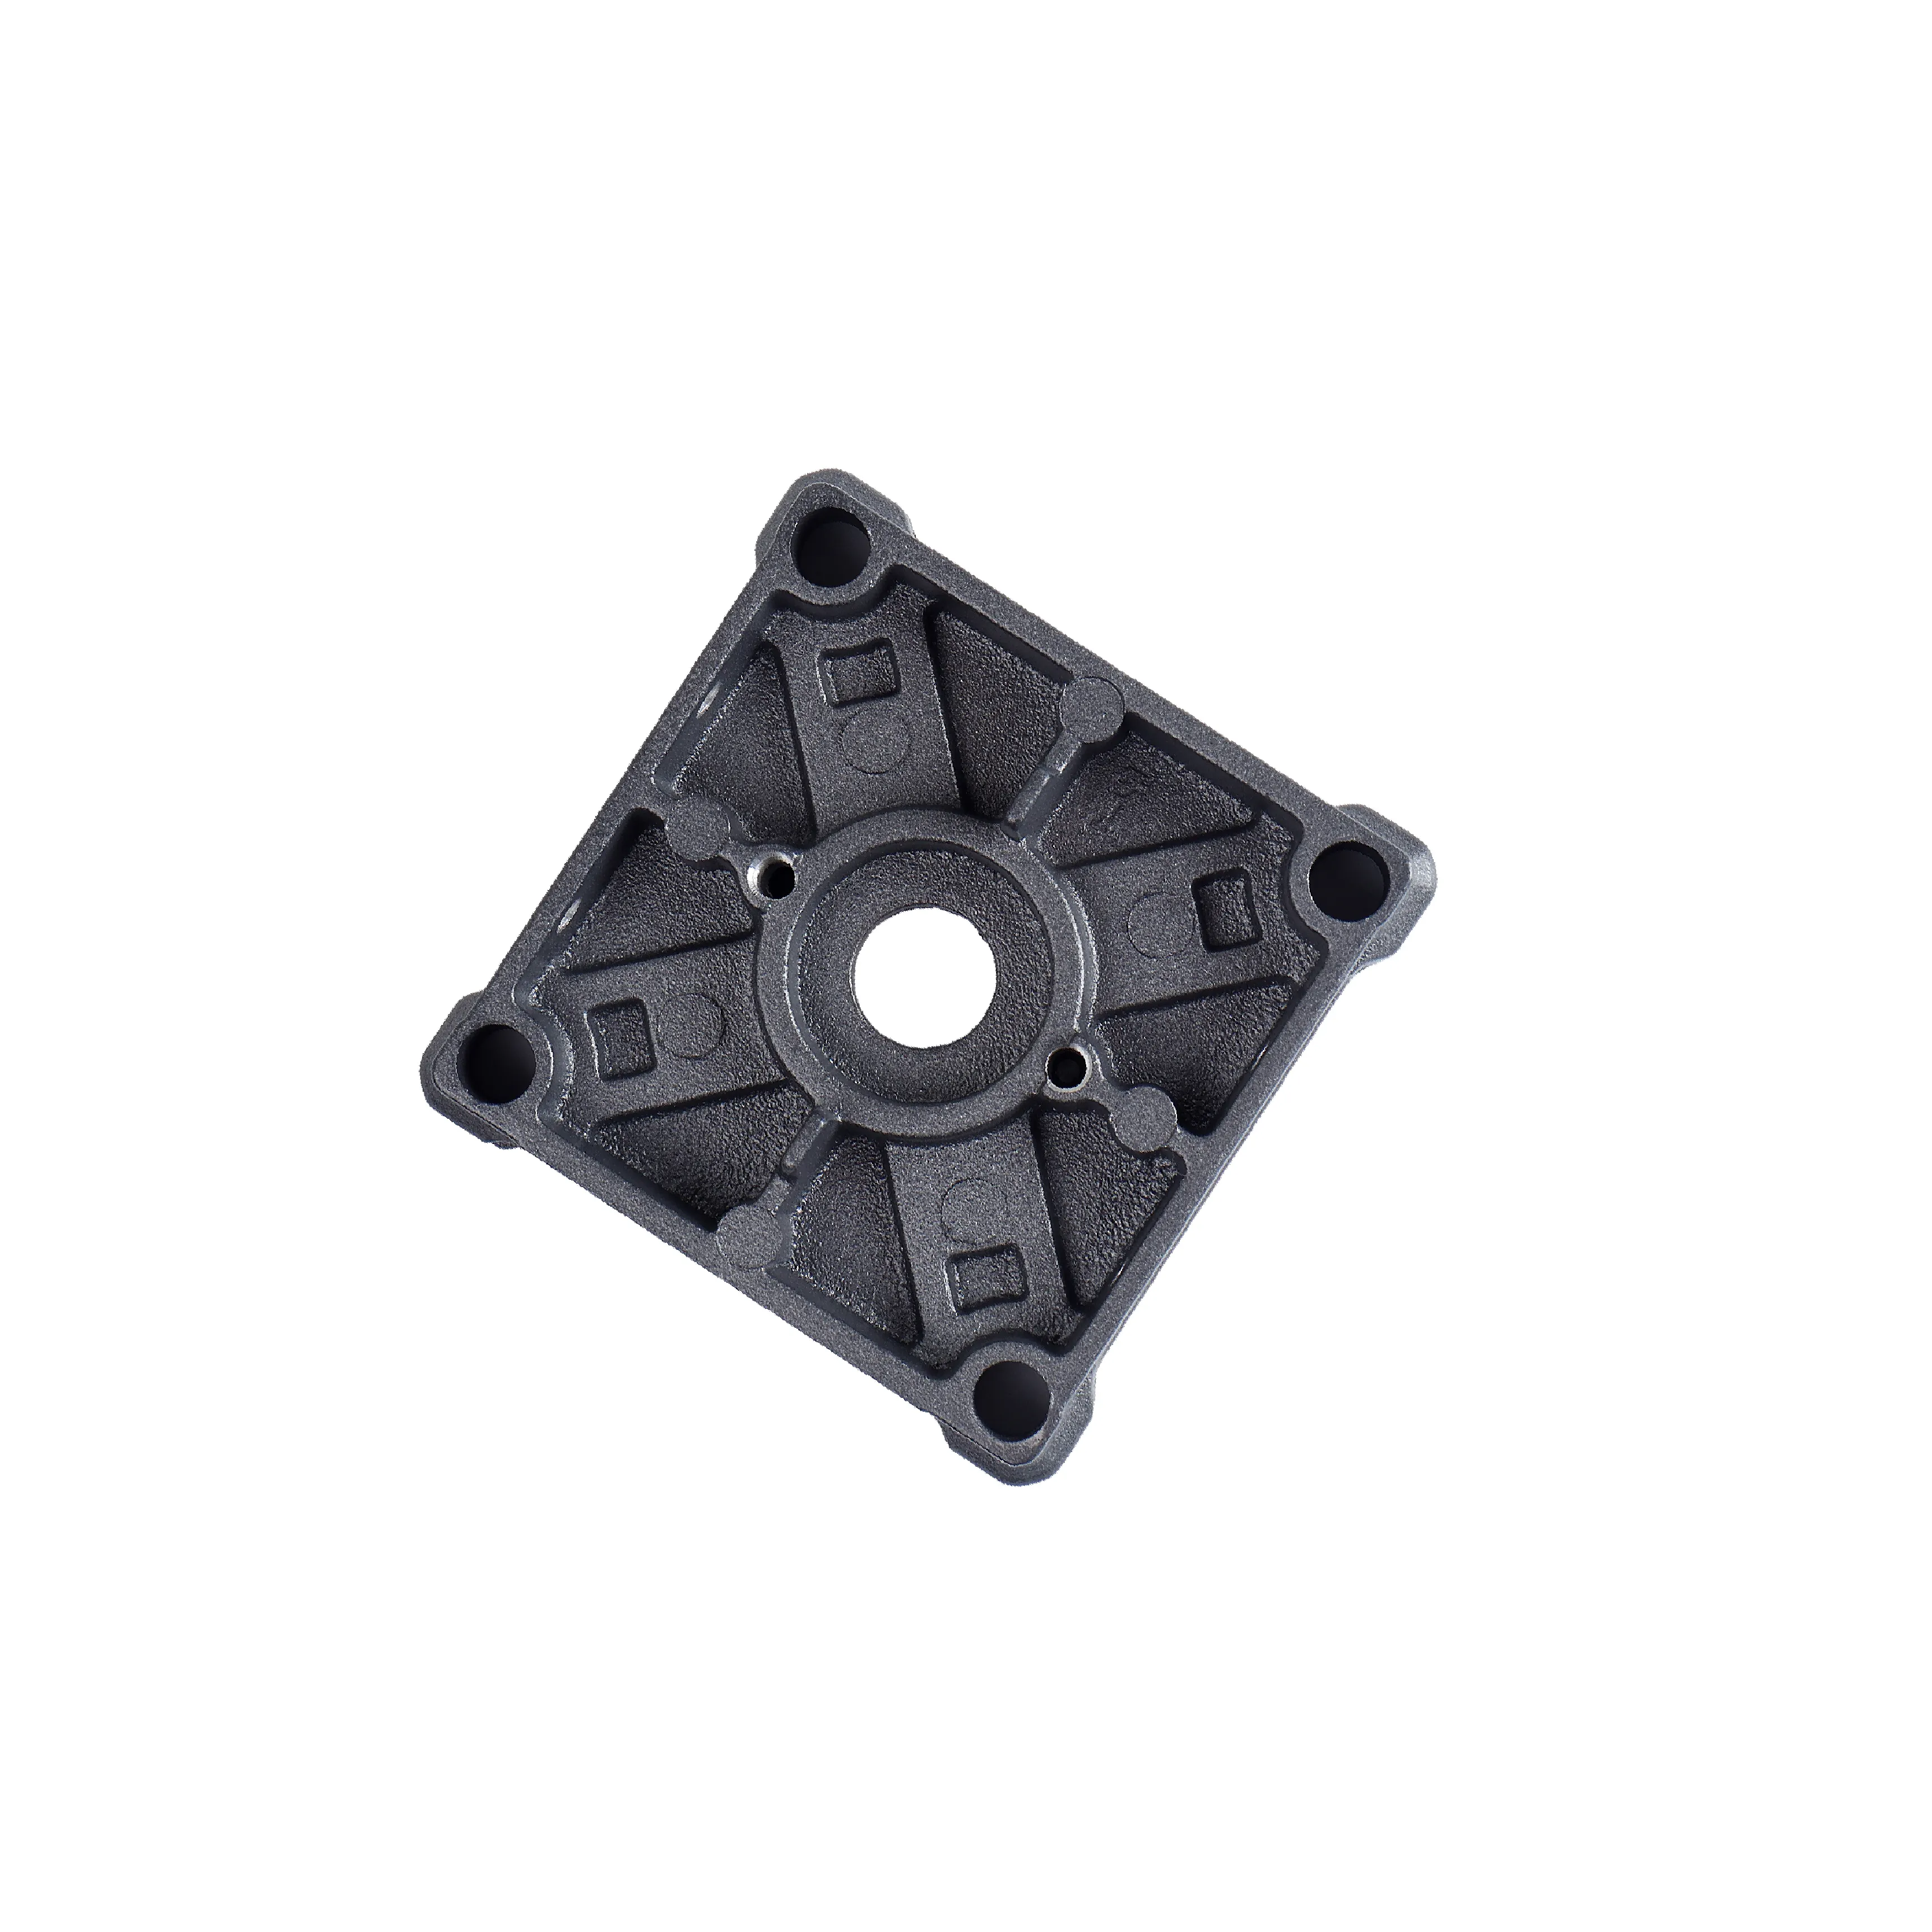 Extremely Popular Best Selling High-Quality Precision Aluminum Die Casting Die Hardware Accessories Alloy Die Casting Components